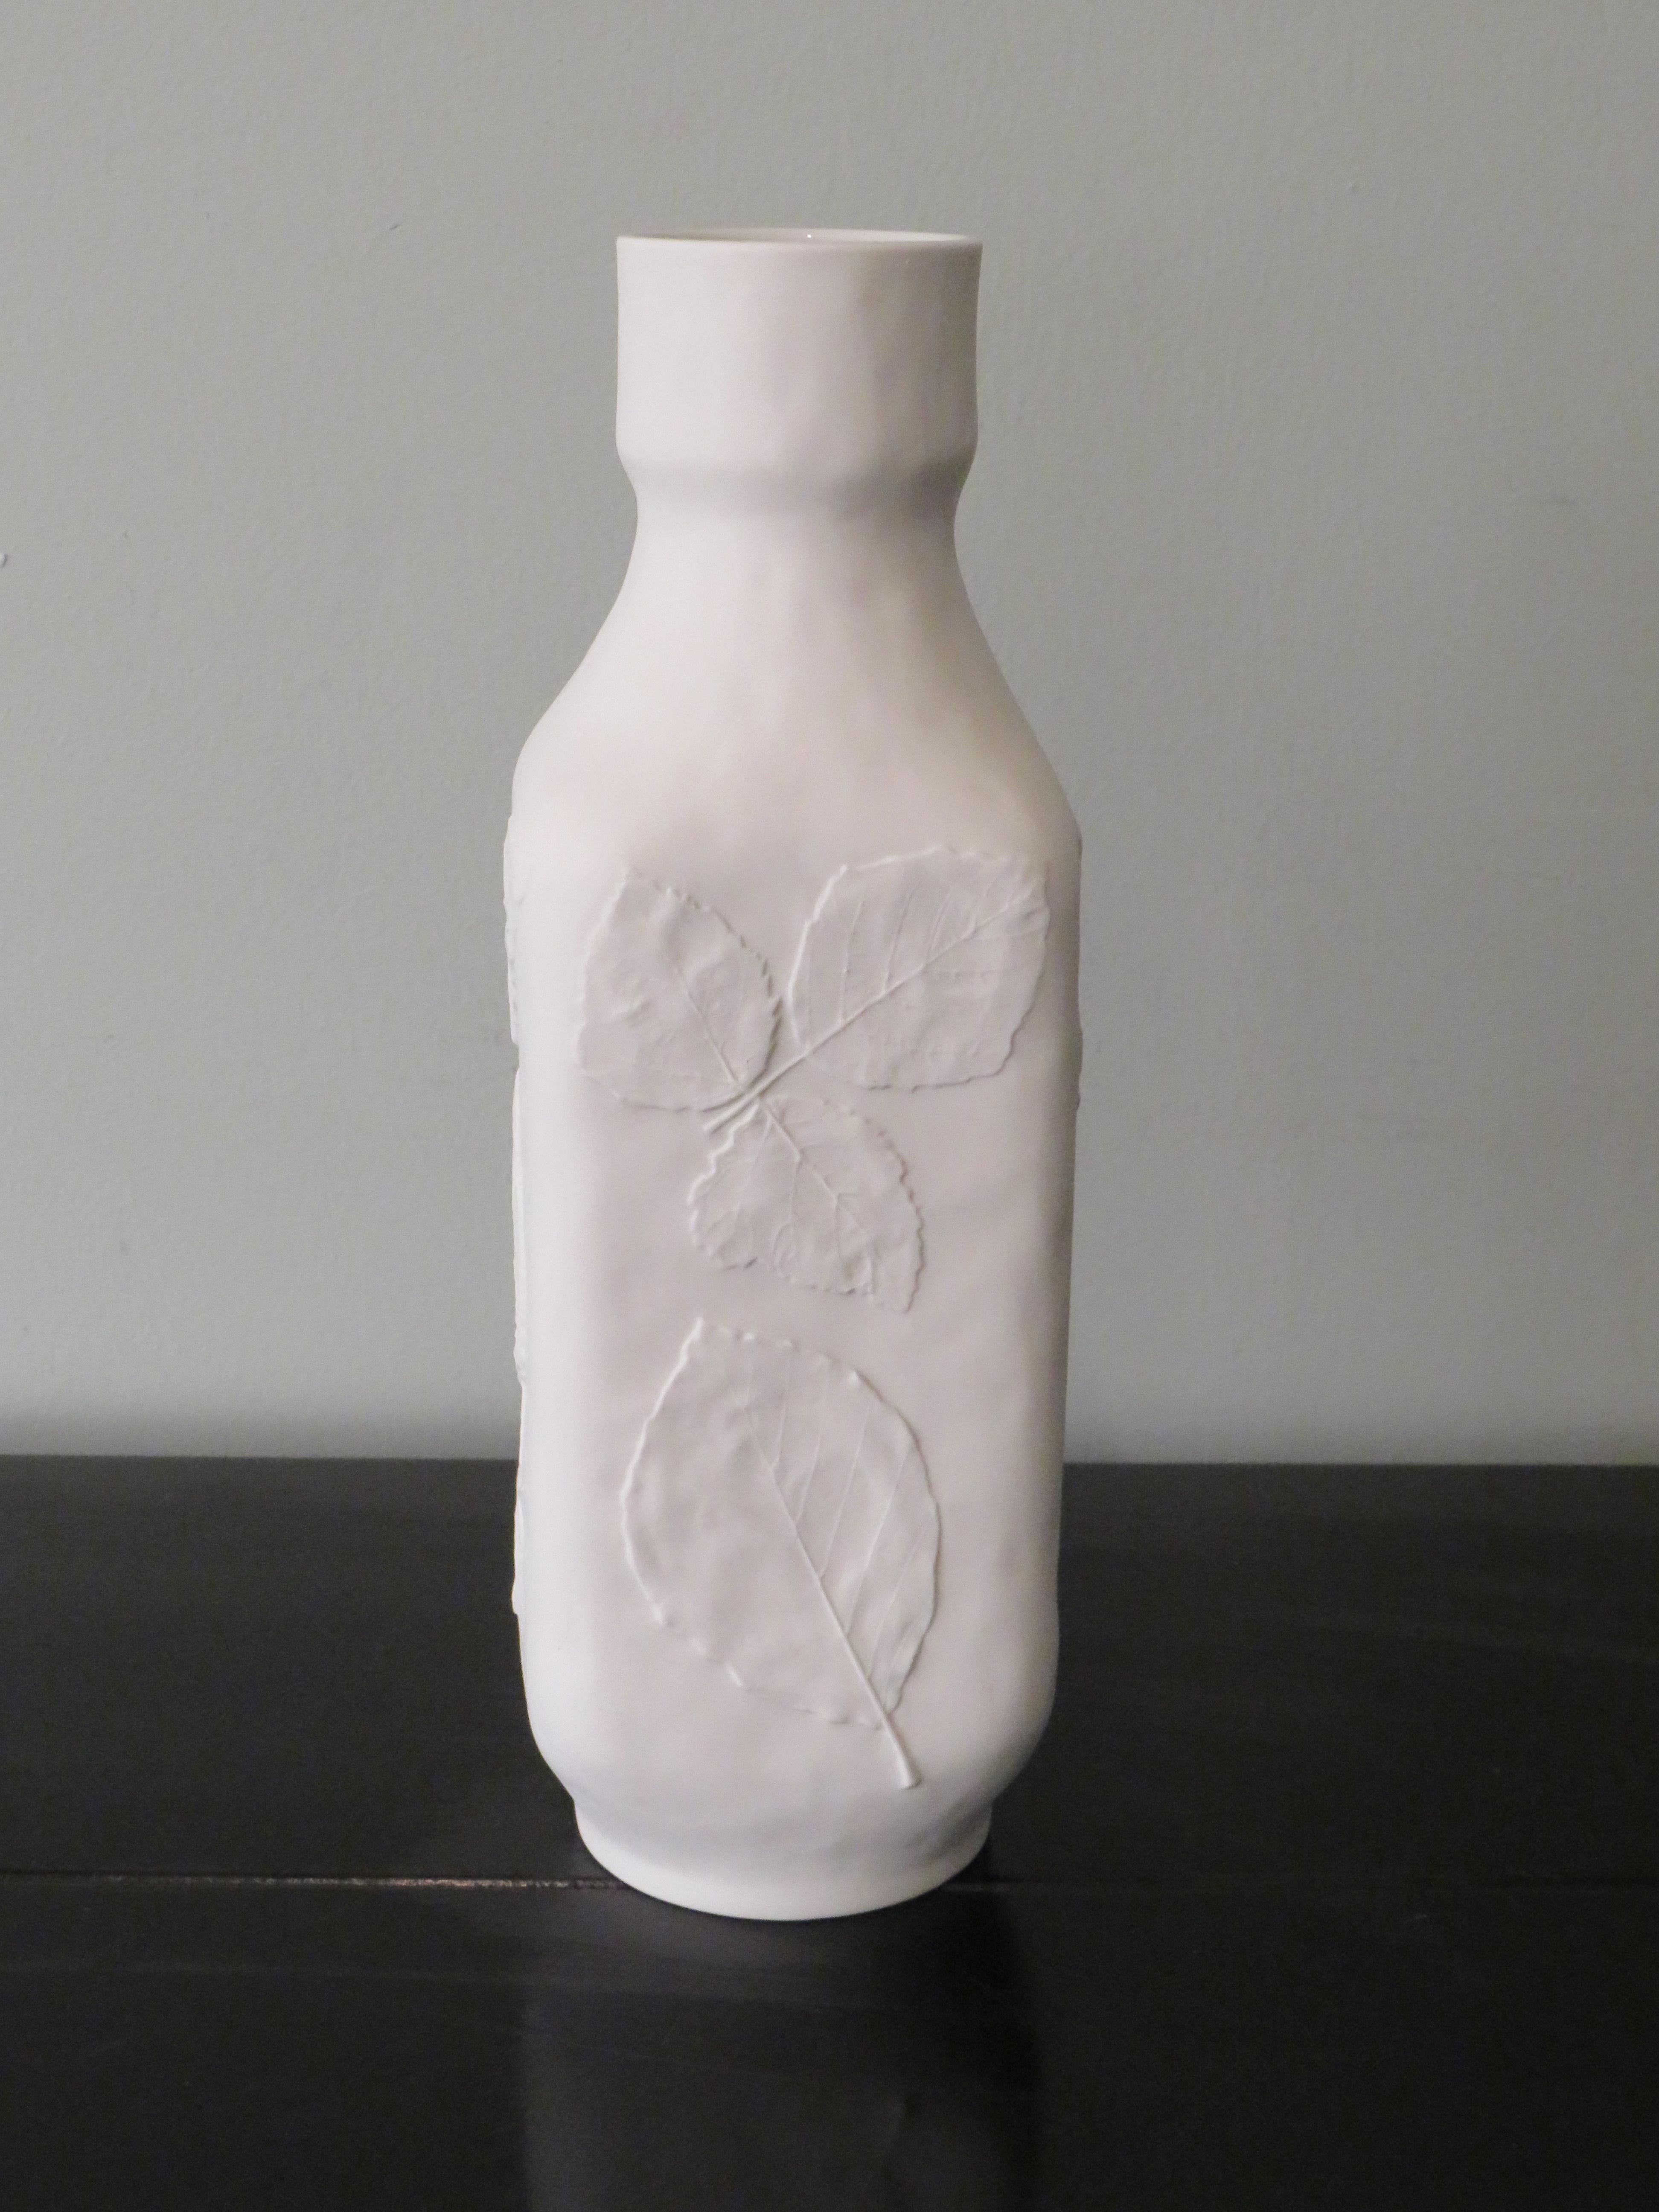 Square vase with rounded corners and on all 4 sides a different embossed floral leaf motif on a vaulted ground. The vase has a matte outside and a glossy inside.
The vase has a mark and number on the bottom.
Measures: The height of the vase is 26